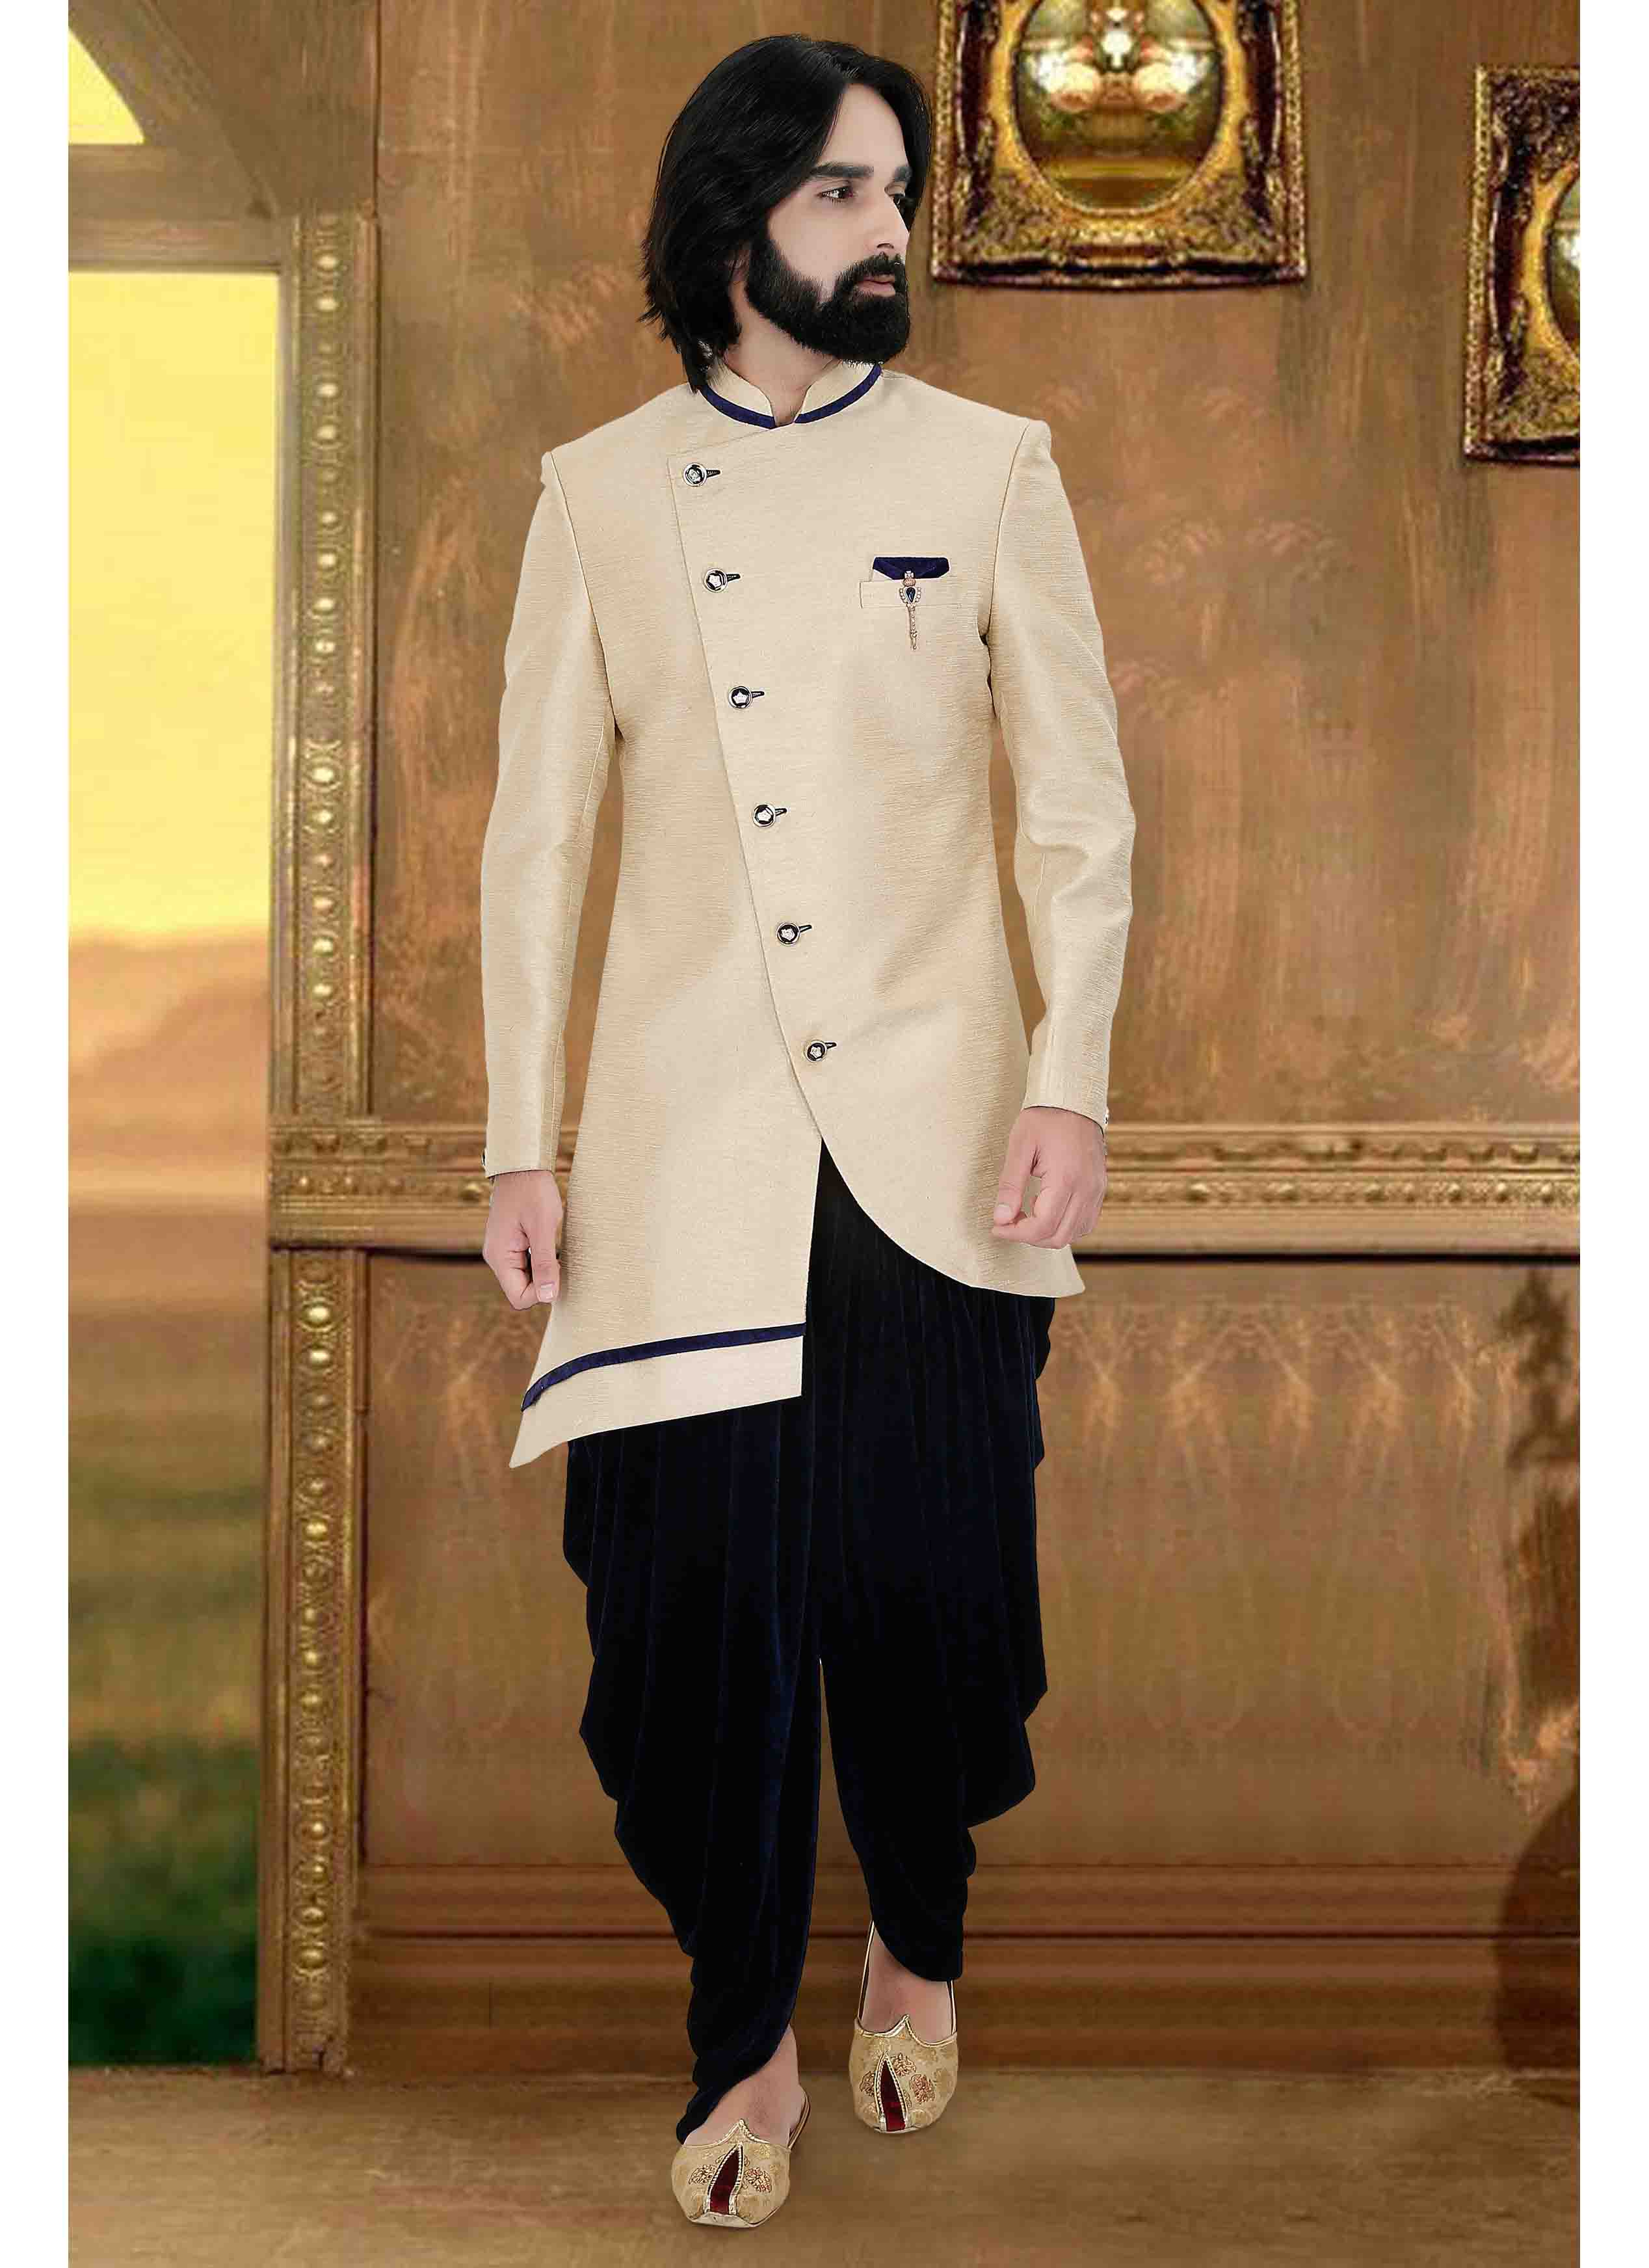 Rent an Attire - When it's something really special, it means it's time for  a good designer sherwani! So choose wisely and join hands with Rent An  Attire and live sustainably. . . . . . . . .